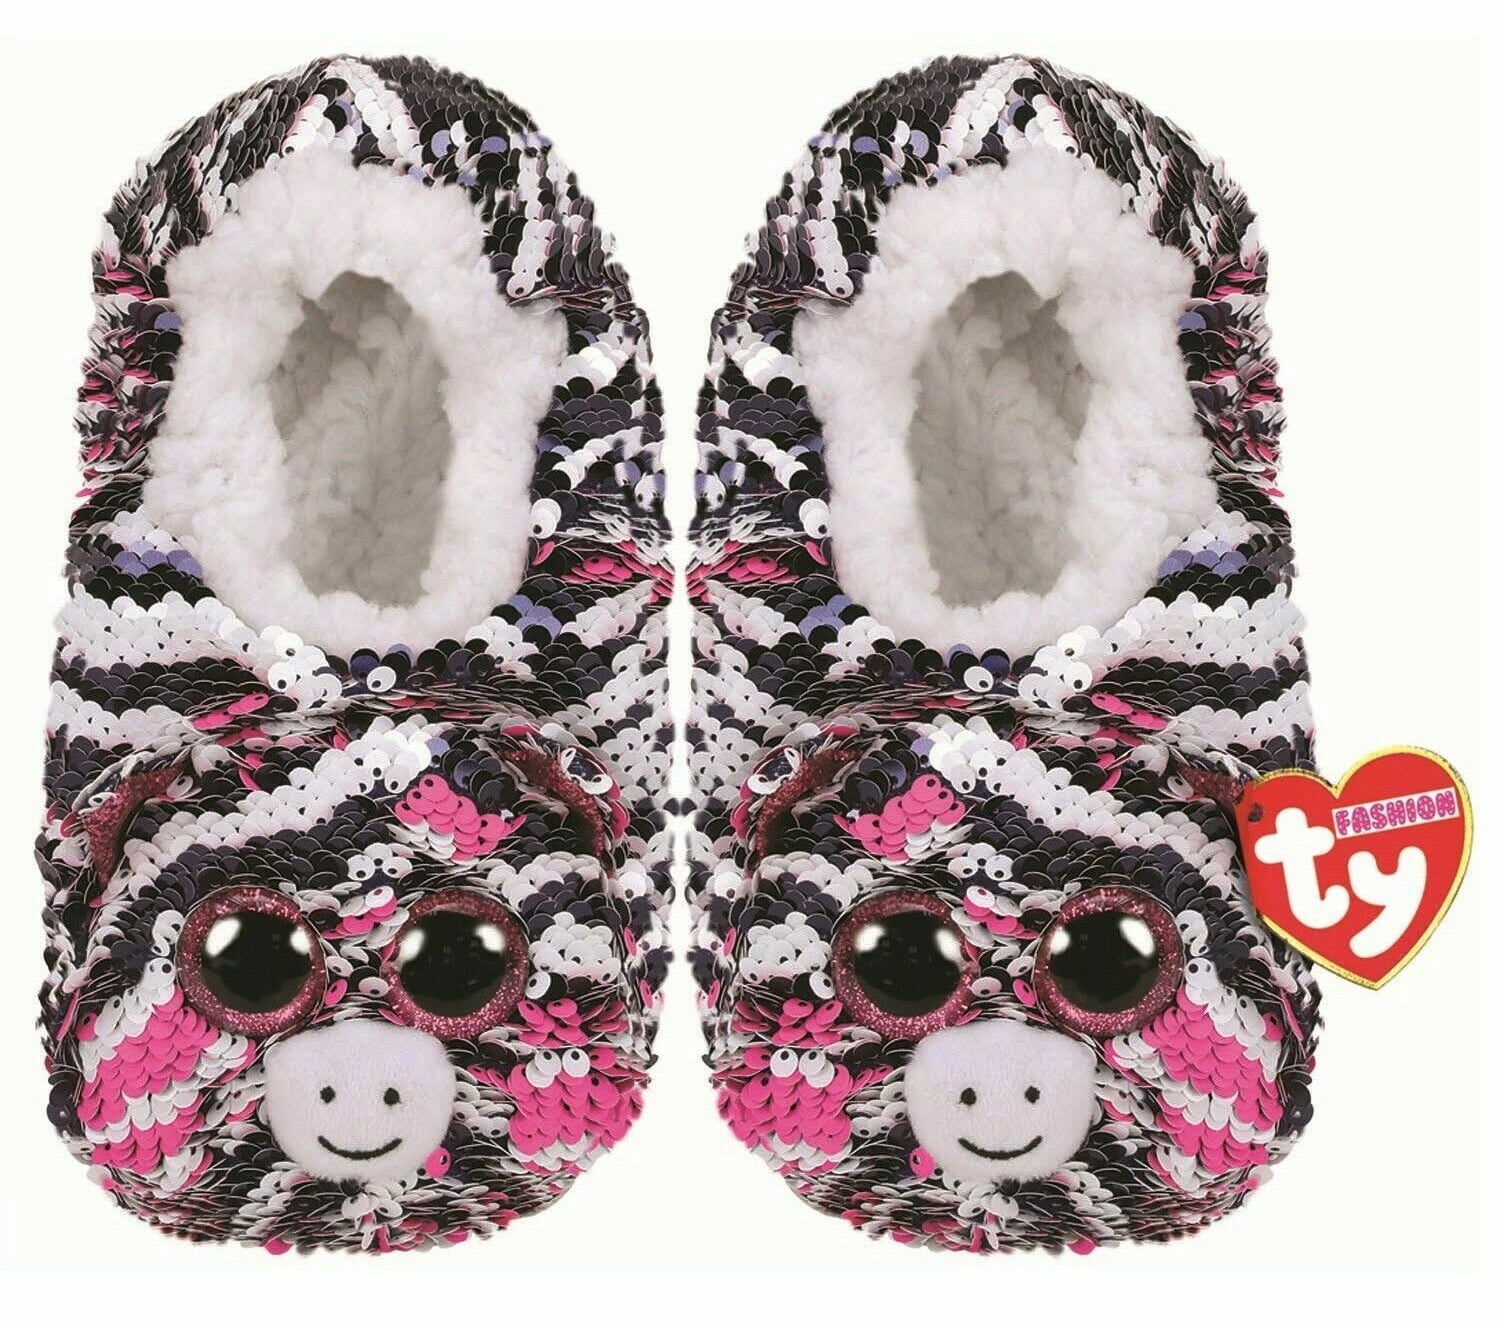 ty fashion slippers